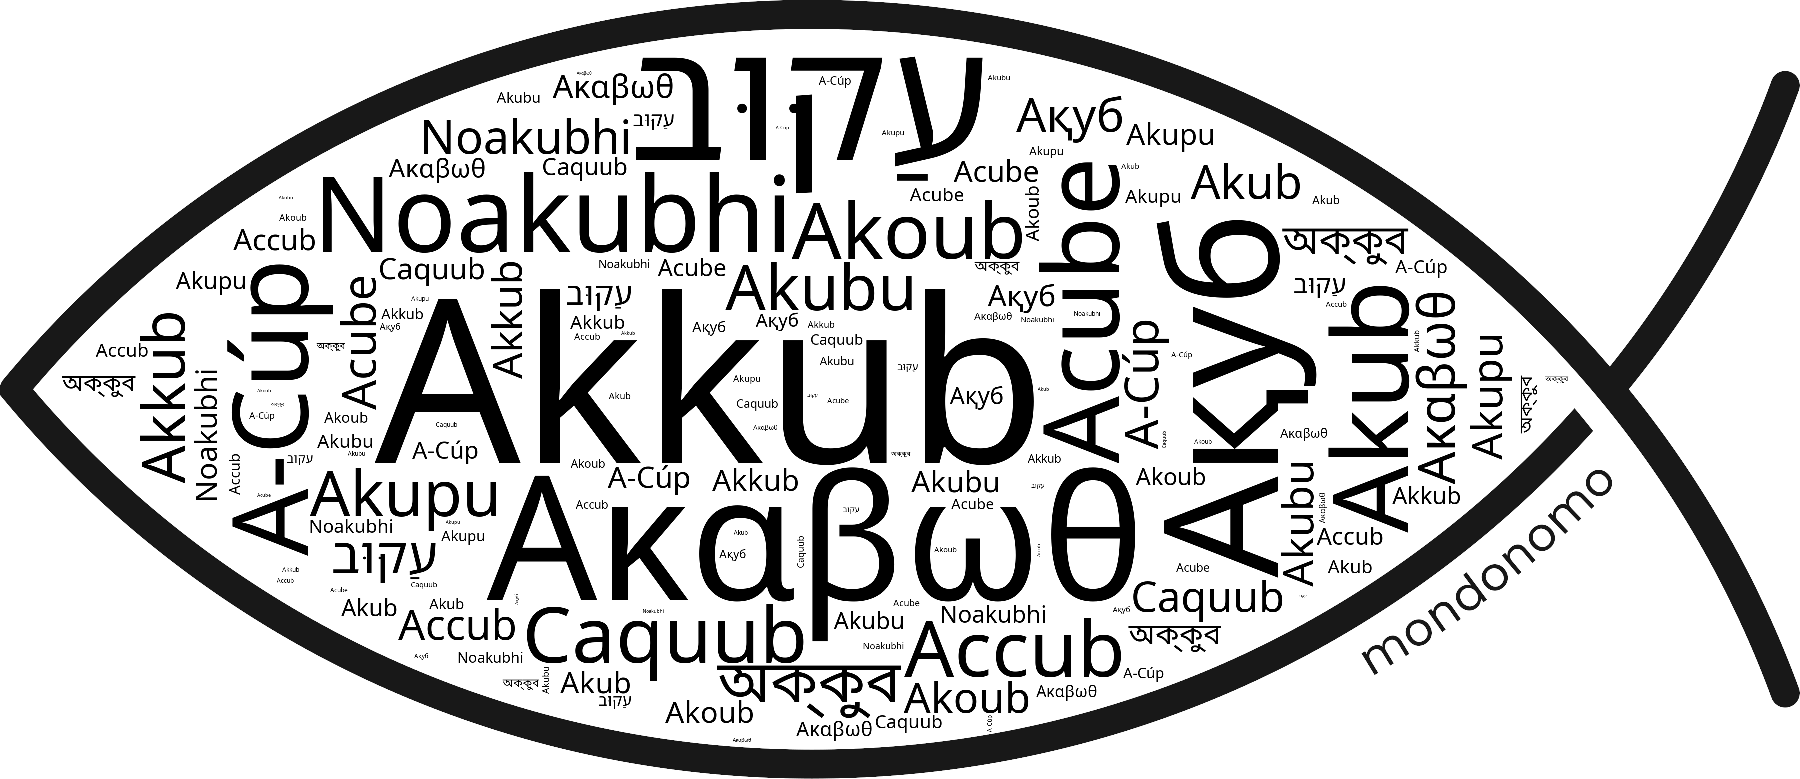 Name Akkub in the world's Bibles